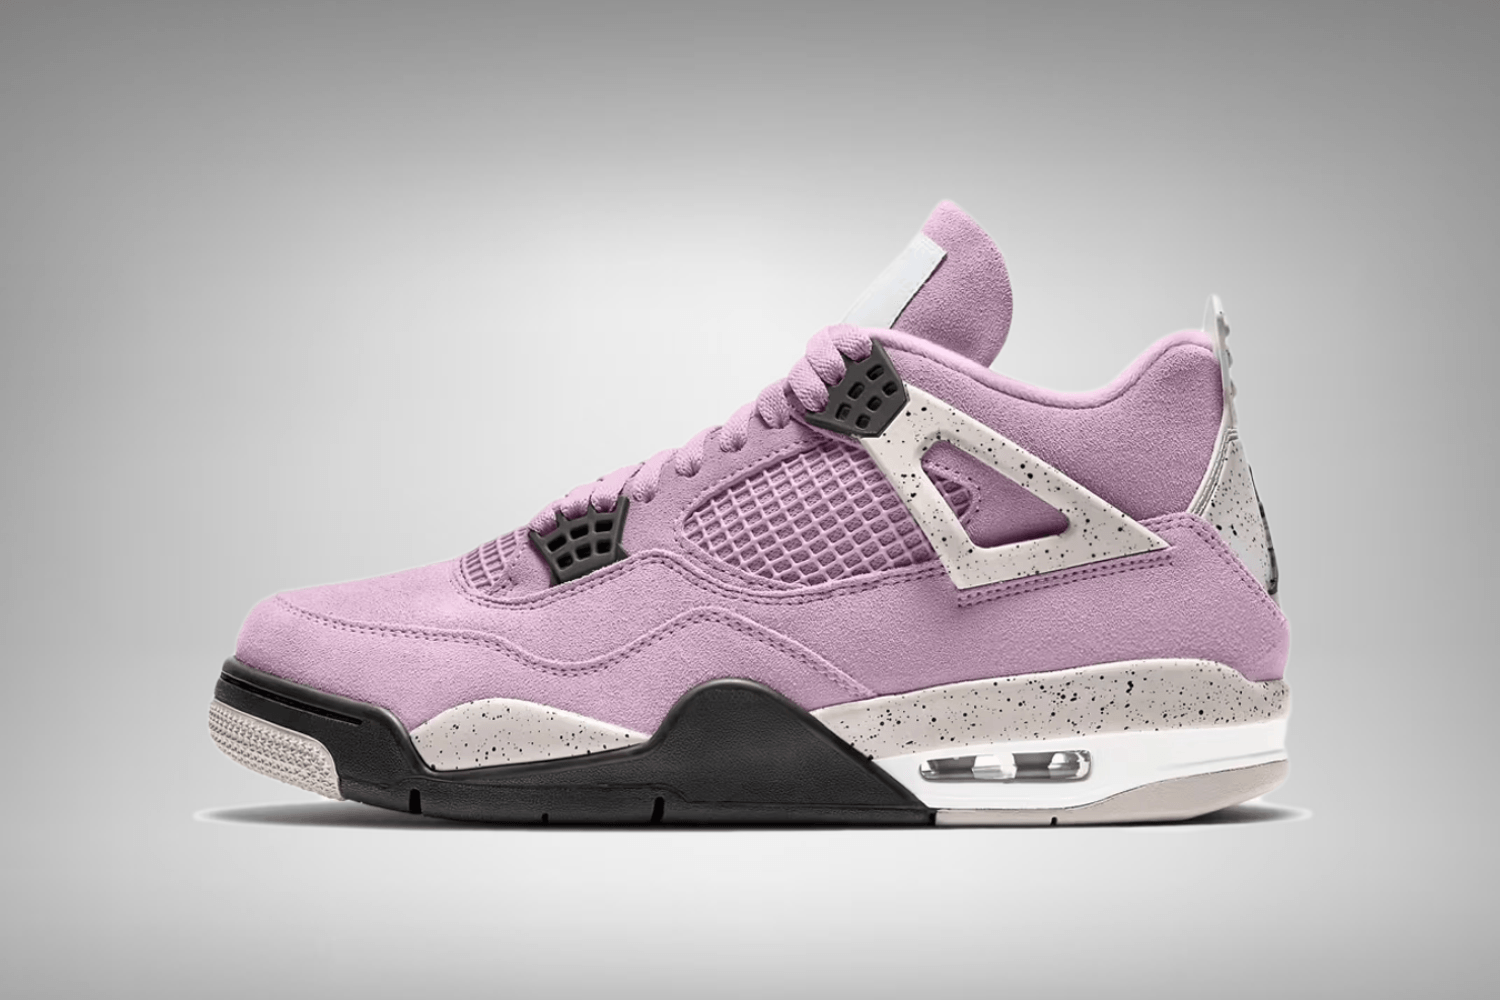 New images of the Air Jordan 4 WMNS 'Orchid'